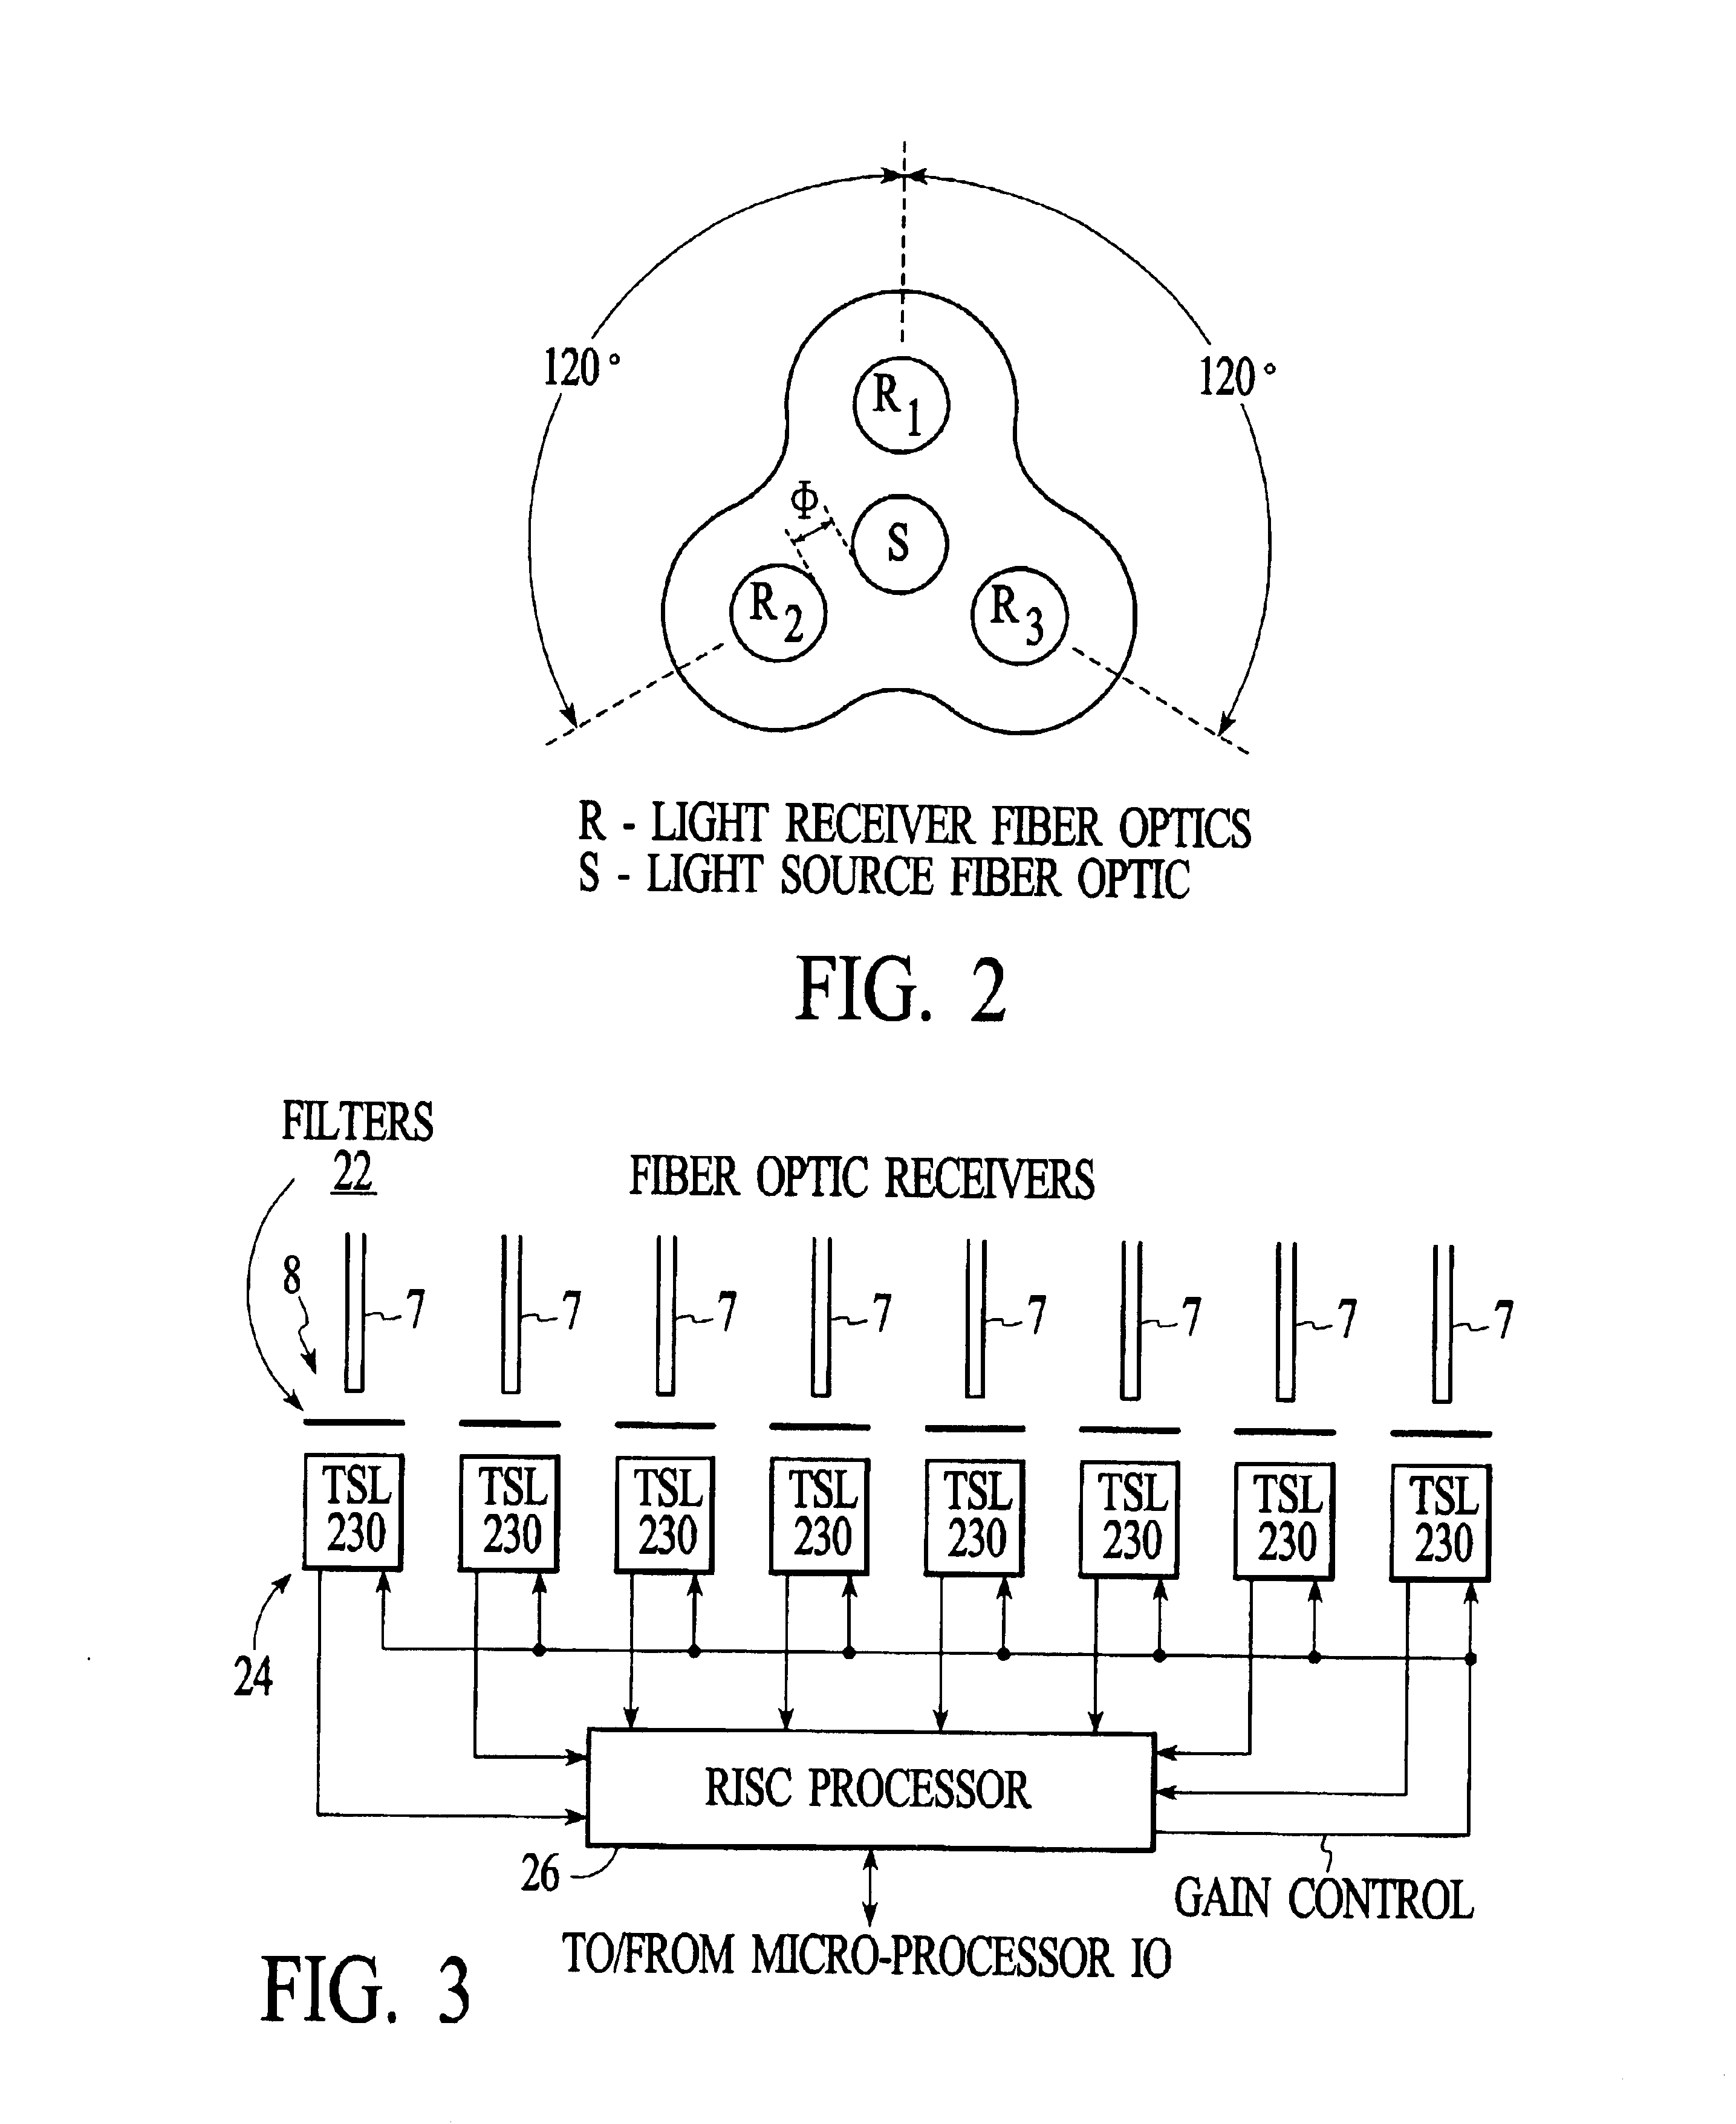 Spectrometer apparatus for determining an optical characteristic of an object or material having one or more sensors for determining a physical position or non-color property